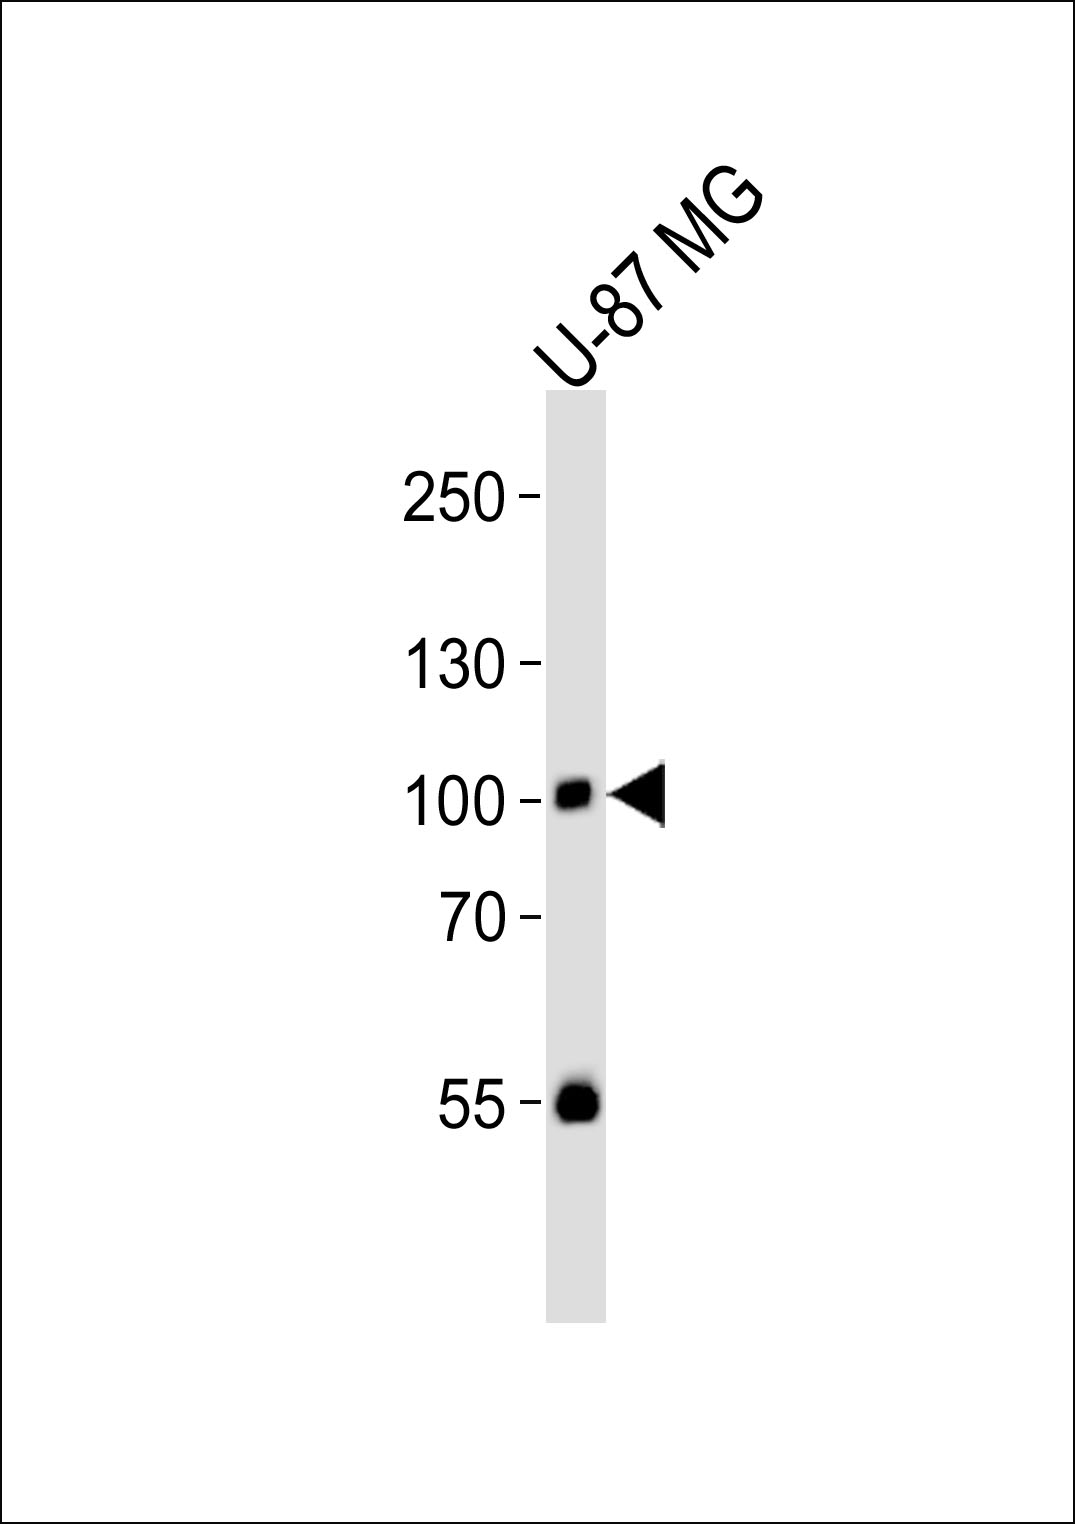 Western blot analysis of lysate from U-87 MG cell line,  using HUMAN-RIN1(Y36) antibody (Cat.  #AP20829a).  AP20829a was diluted at 1:1000.  A goat anti-rabbit IgG H&L(HRP) at 1:10000 dilution was used as the secondary antibody. Lysate at 35ug.